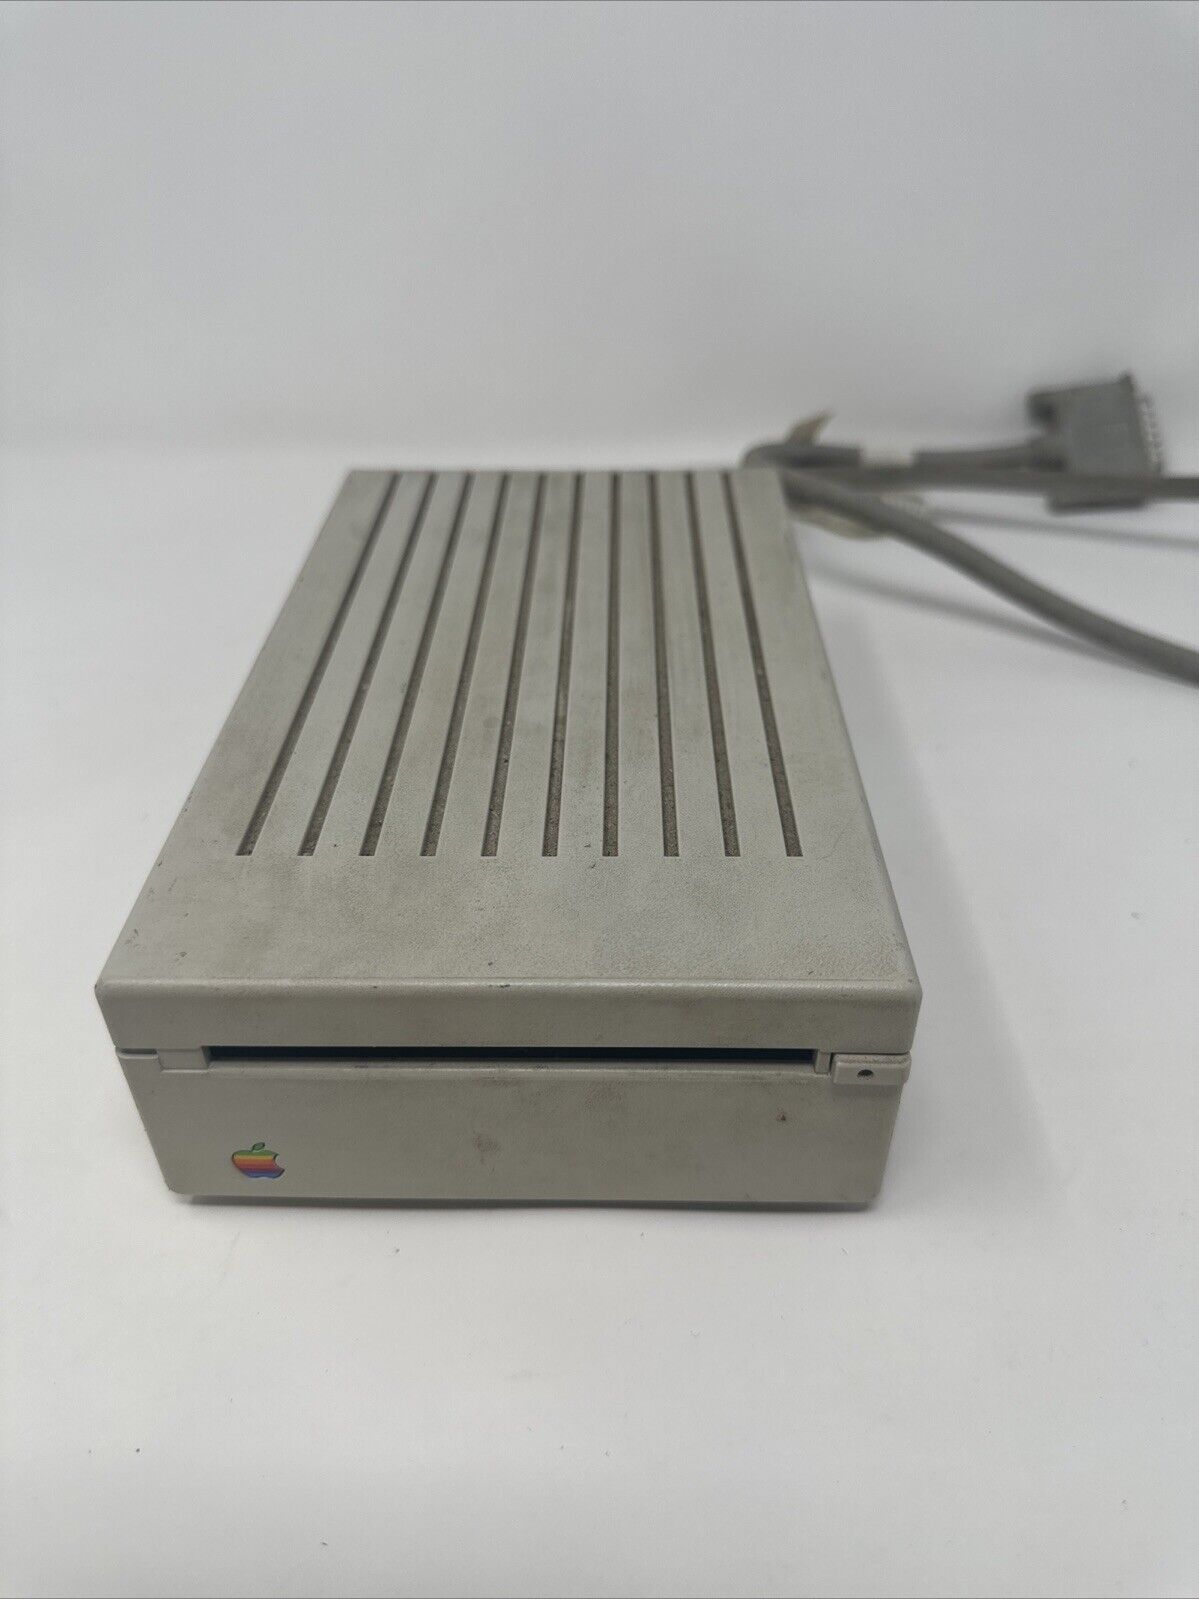 VINTAGE Apple 3.5 Drive External Floppy Disk Drive A9M0106 UNTESTED AS IS